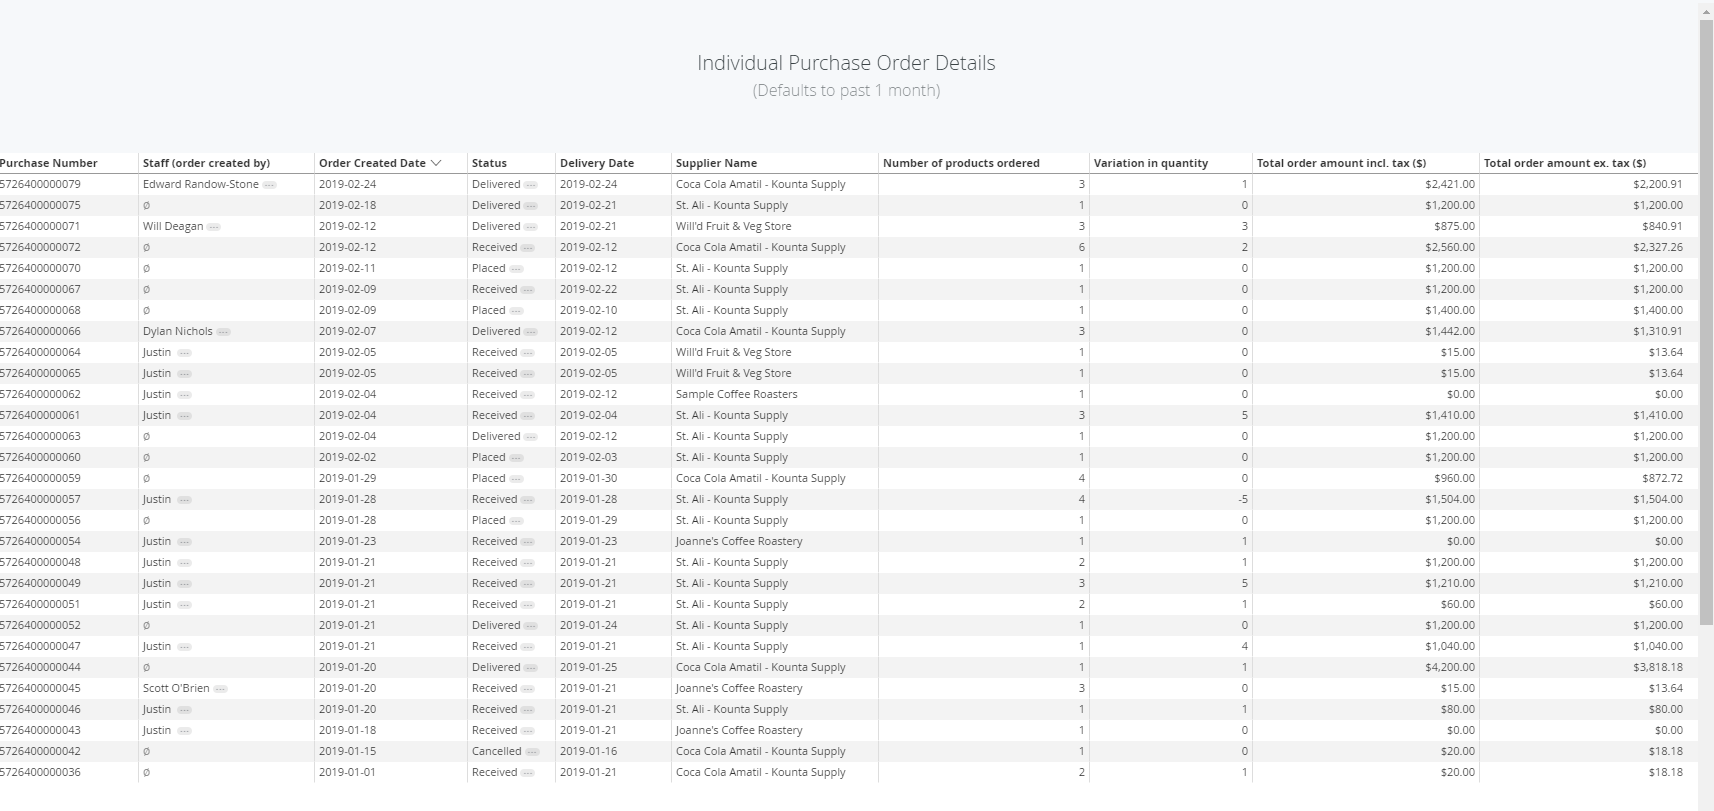 6_individual_purchase_order_details.PNG